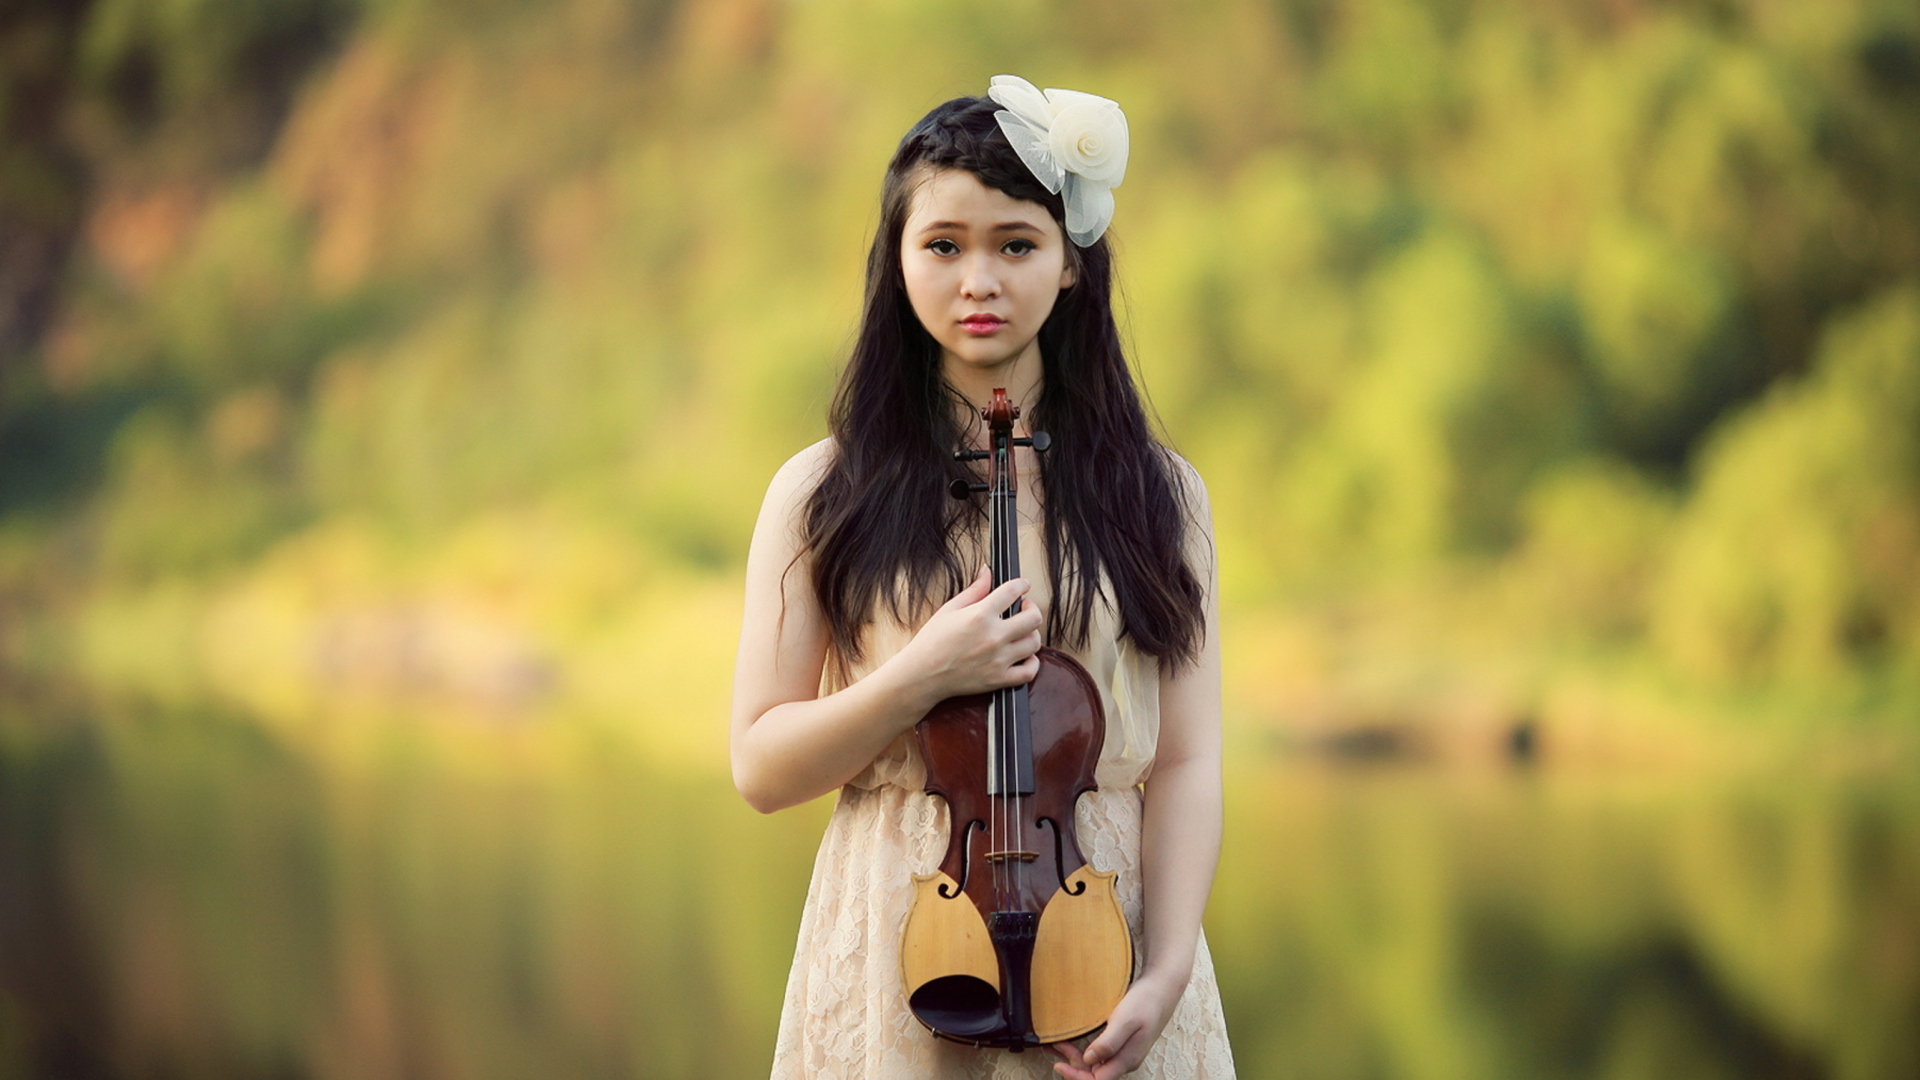 Girl With Violin wallpaper 1920x1080